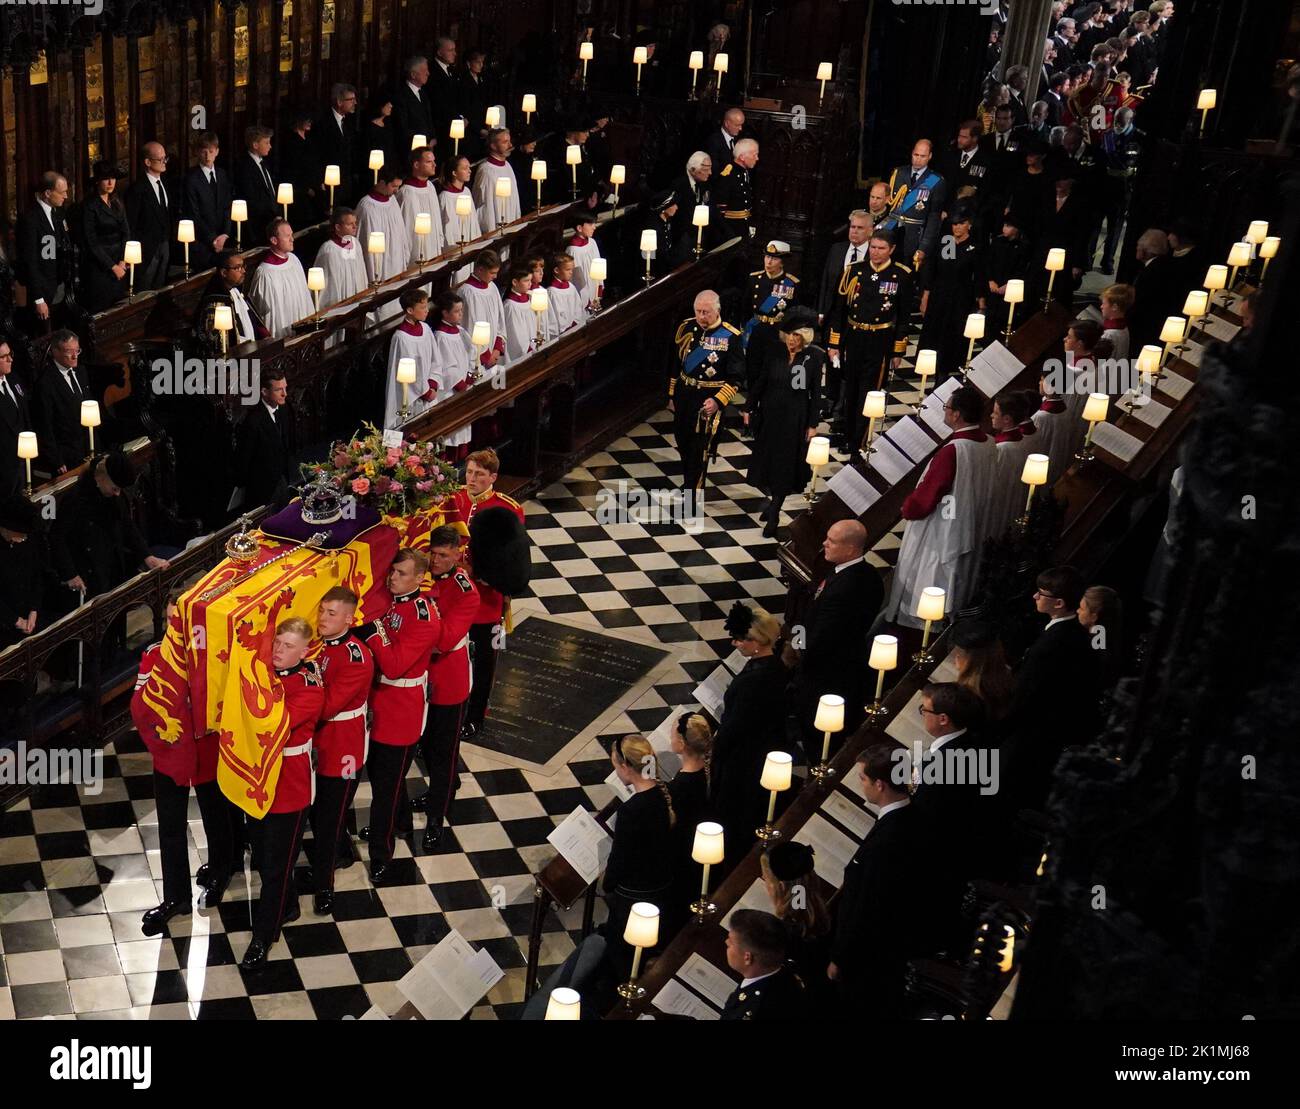 The coffin of Queen Elizabeth II, followed by (left to right, from front) King Charles III, the Queen Consort, the Princess Royal, Vice Admiral Sir Tim Laurence, the Duke of York, the Earl of Wessex, the Countess of Wessex, the Prince of Wales, Prince George, Princess Charlotte, the Princess of Wales, the Duke of Sussex, the Duchess of Sussex, Peter Phillips, the Earl of Snowdon, the Duke of Gloucester, the Duke of Kent, and Prince Michael of Kent, is carried by the Bearer Party in to the Committal Service at St George's Chapel in Windsor Castle, Berkshire. Picture date: Monday September 19, 2 Stock Photo